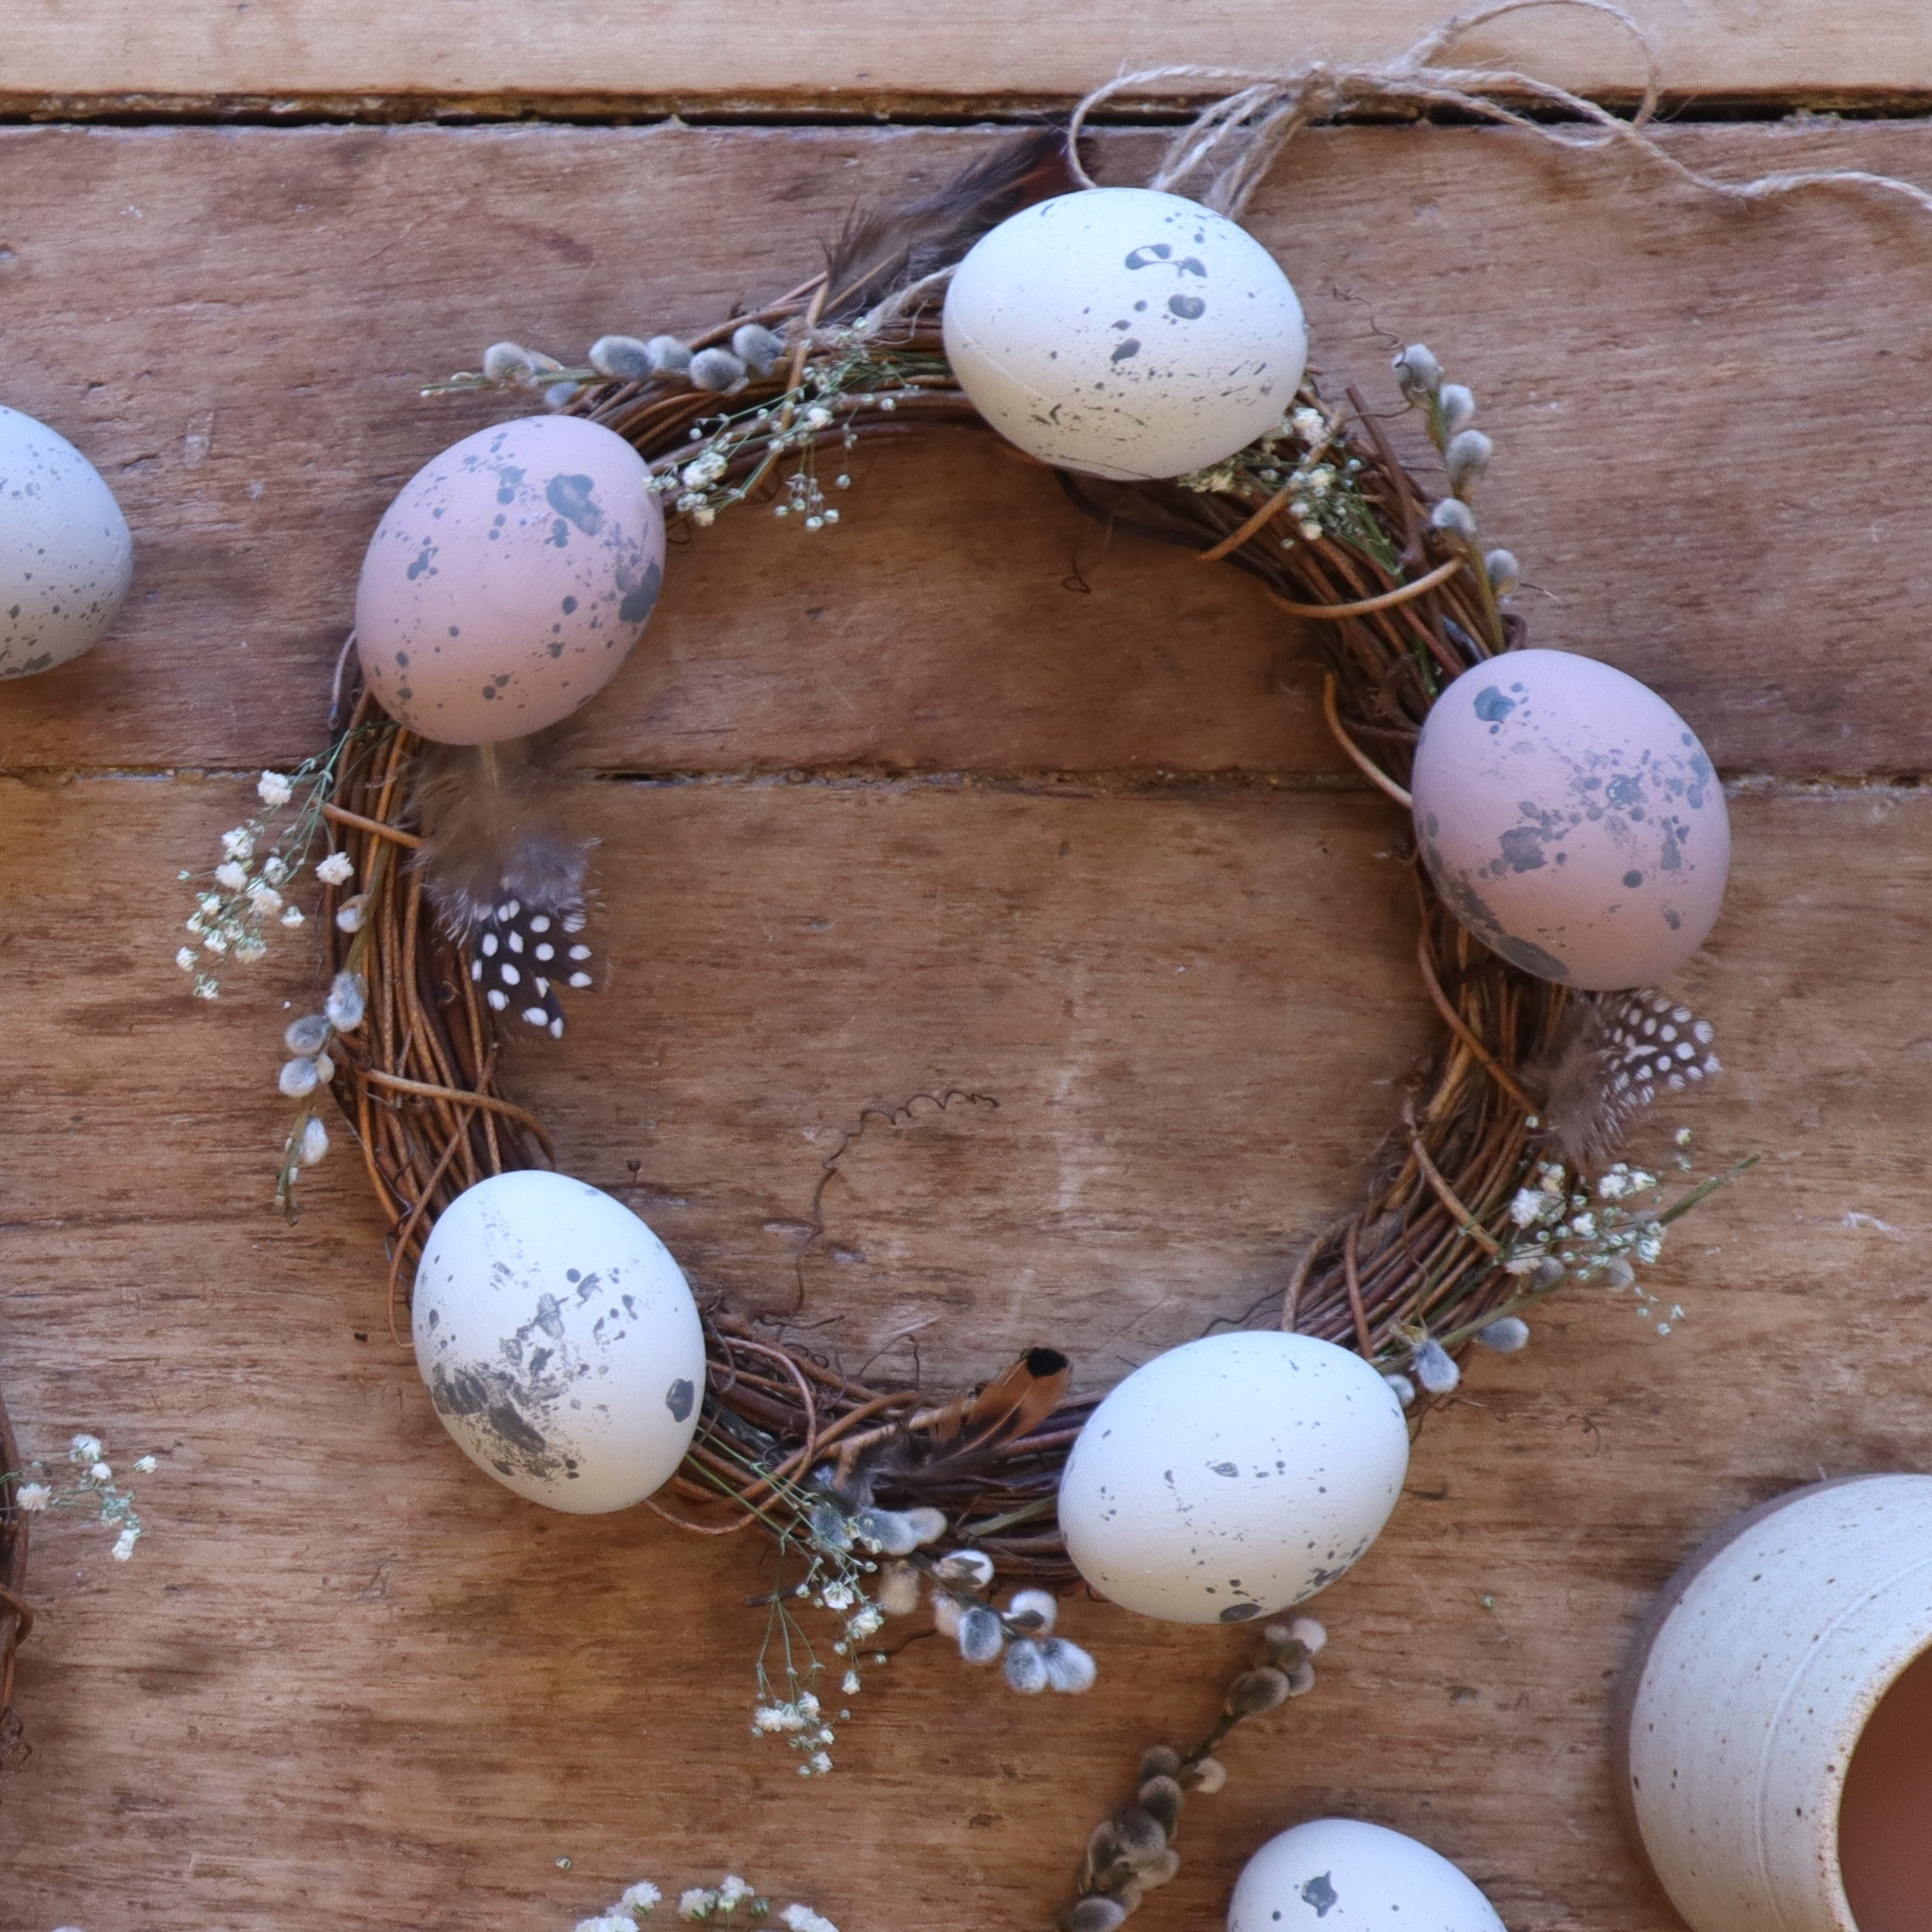 alt="rustic spring wreath featuring handpainted speckled eggs. cruelty free feathers and foraged pussy willow. Wreath available from Bramble and Fox UK hygge homewares and gifts"